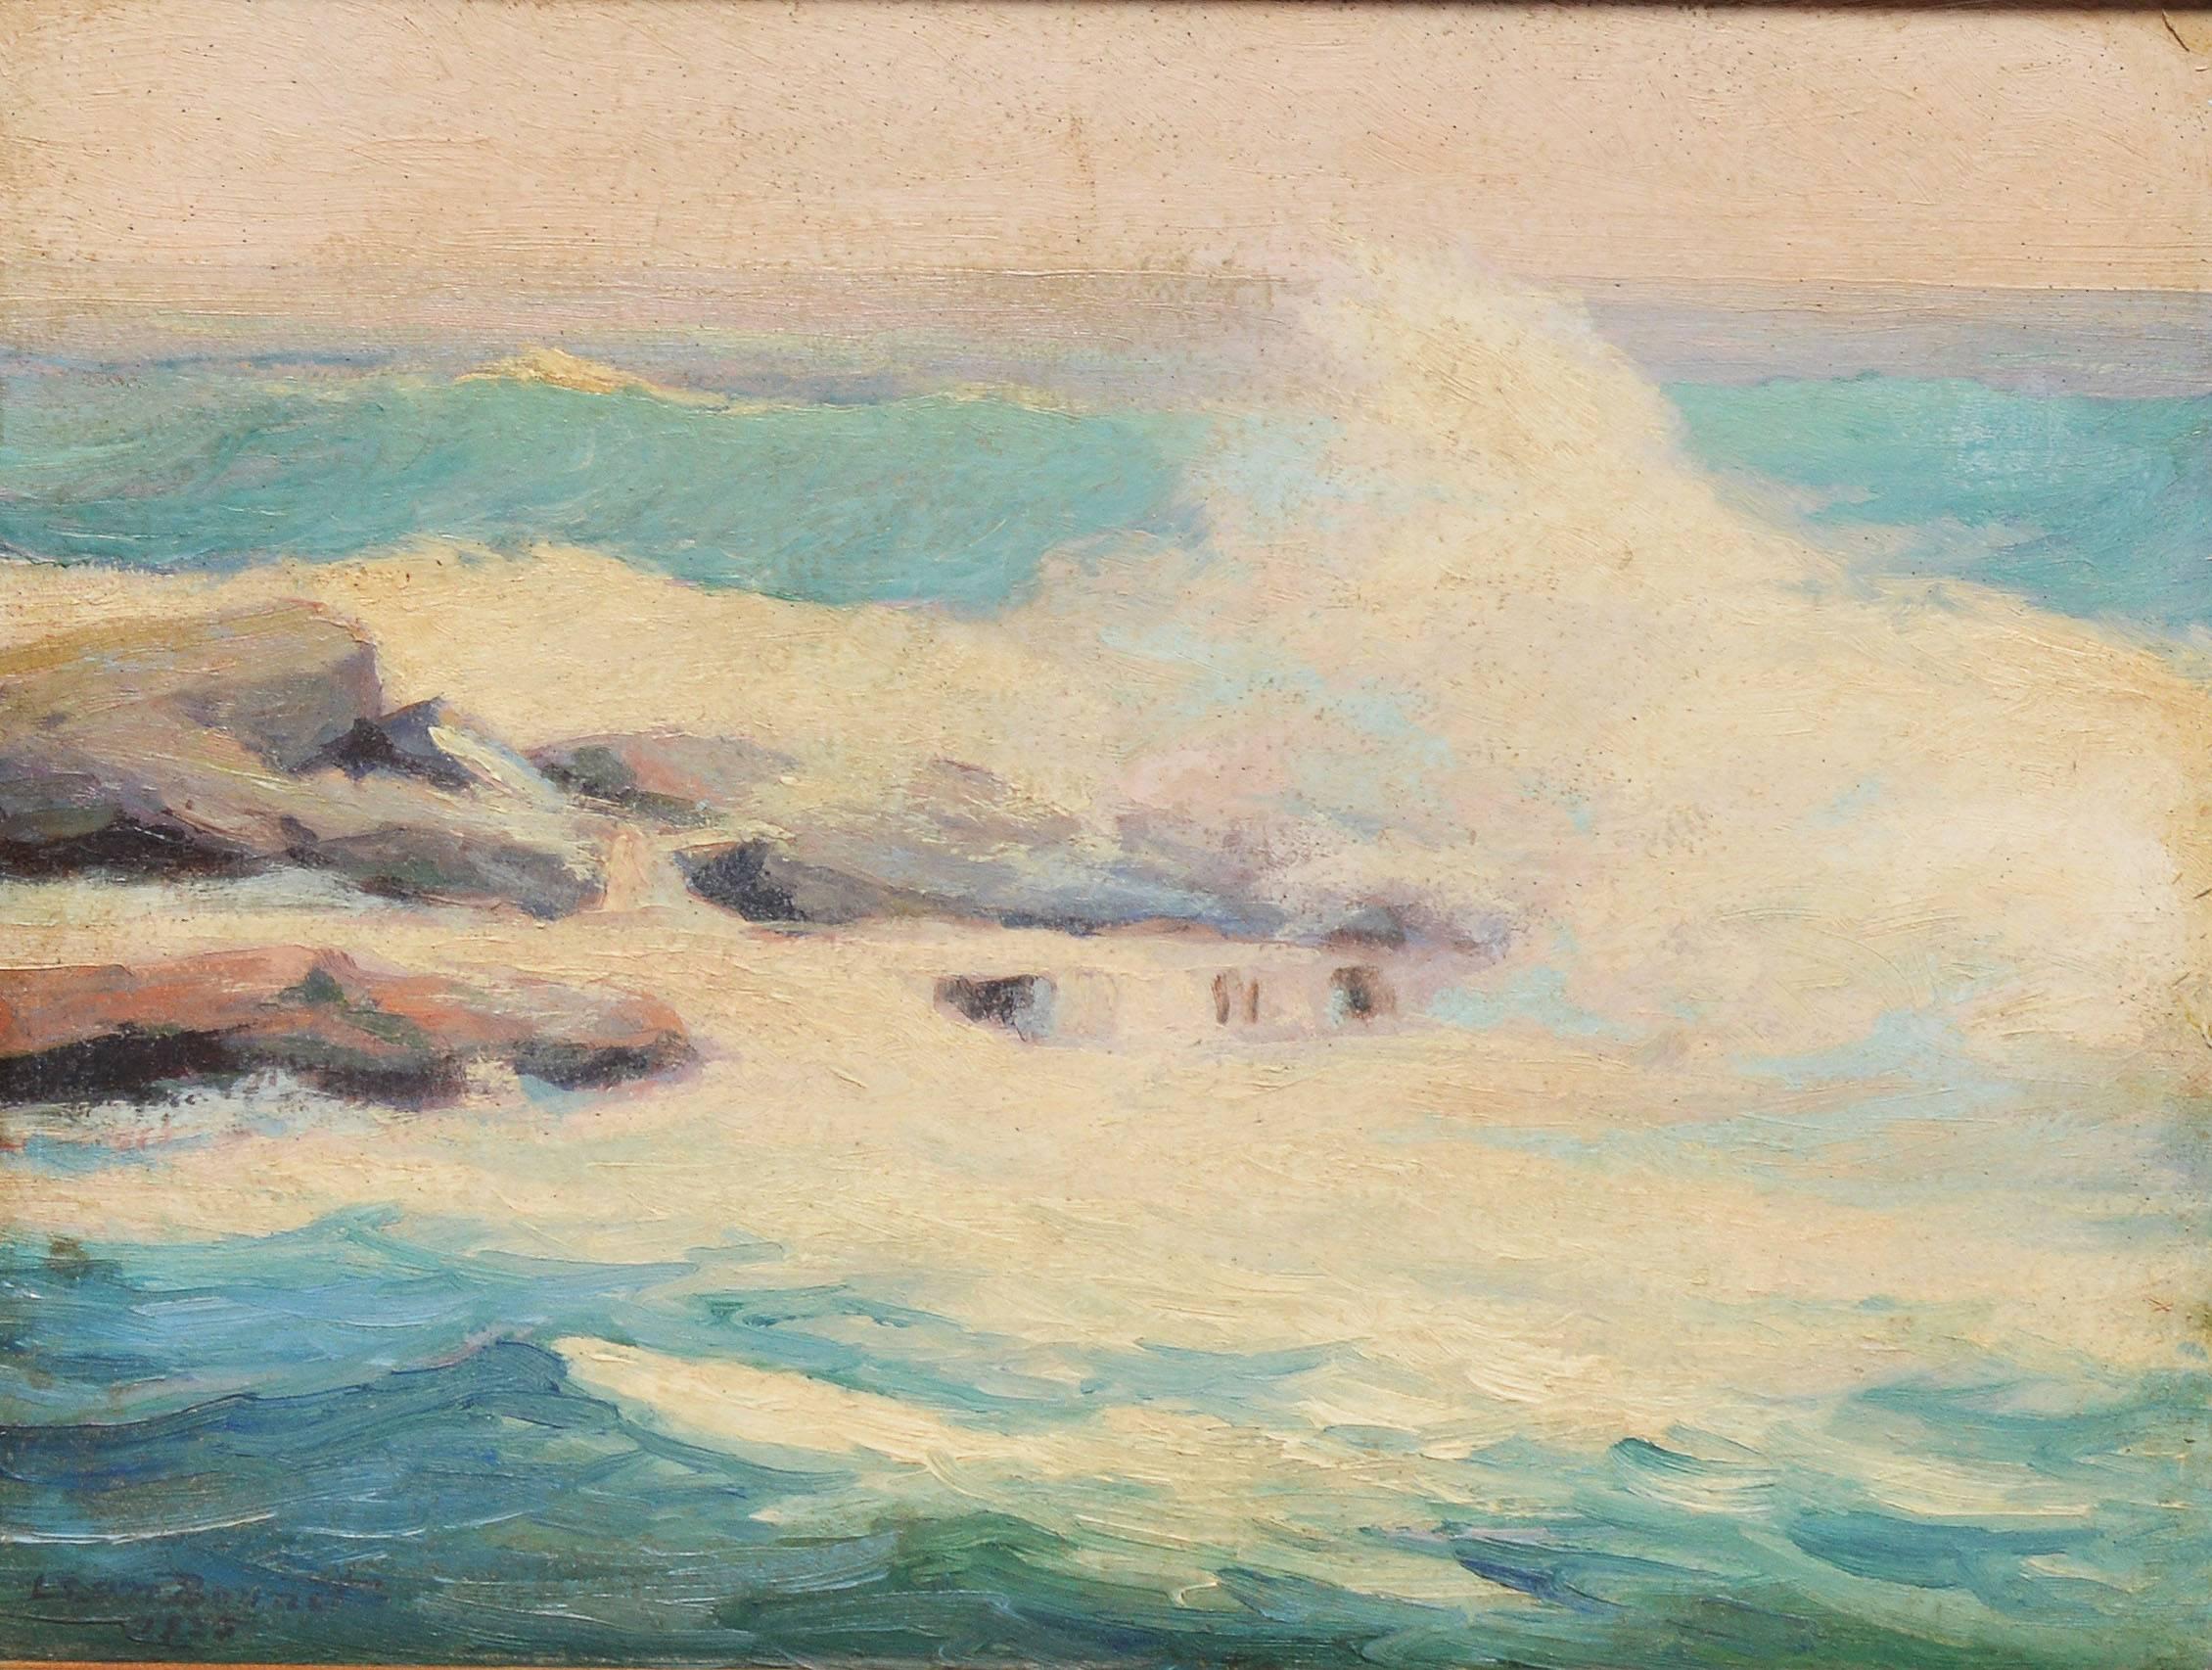 Impressionist beach view with crashing waves by Leon Bonnet  (1868 - 1936).  Oil on board, circa 1910.  Signed lower left, 